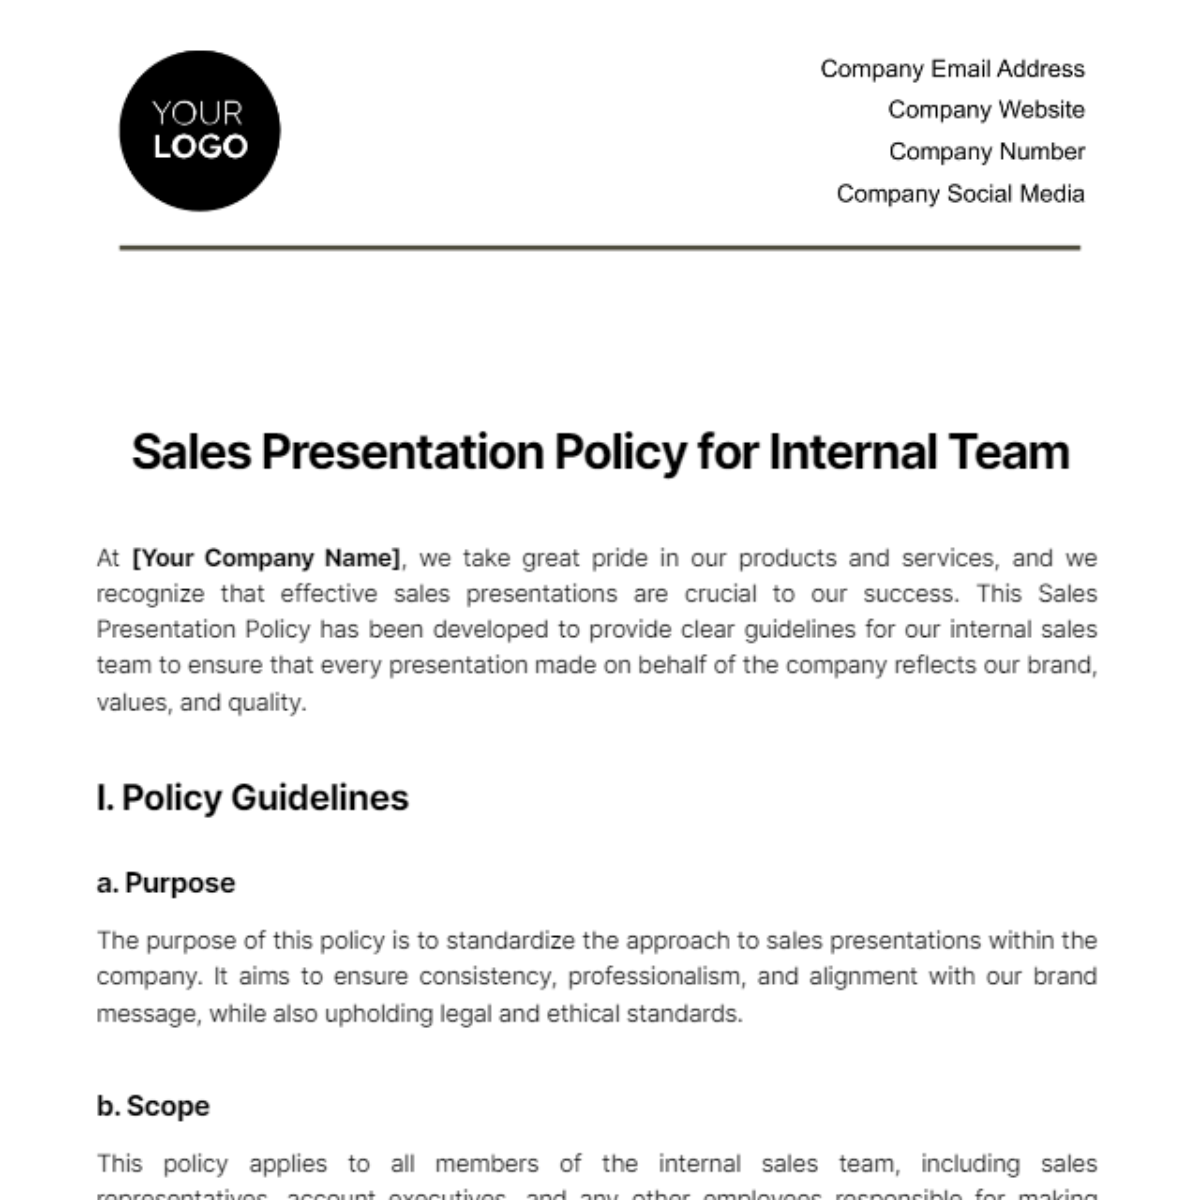 Free Sales Presentation Policy for Internal Team Template